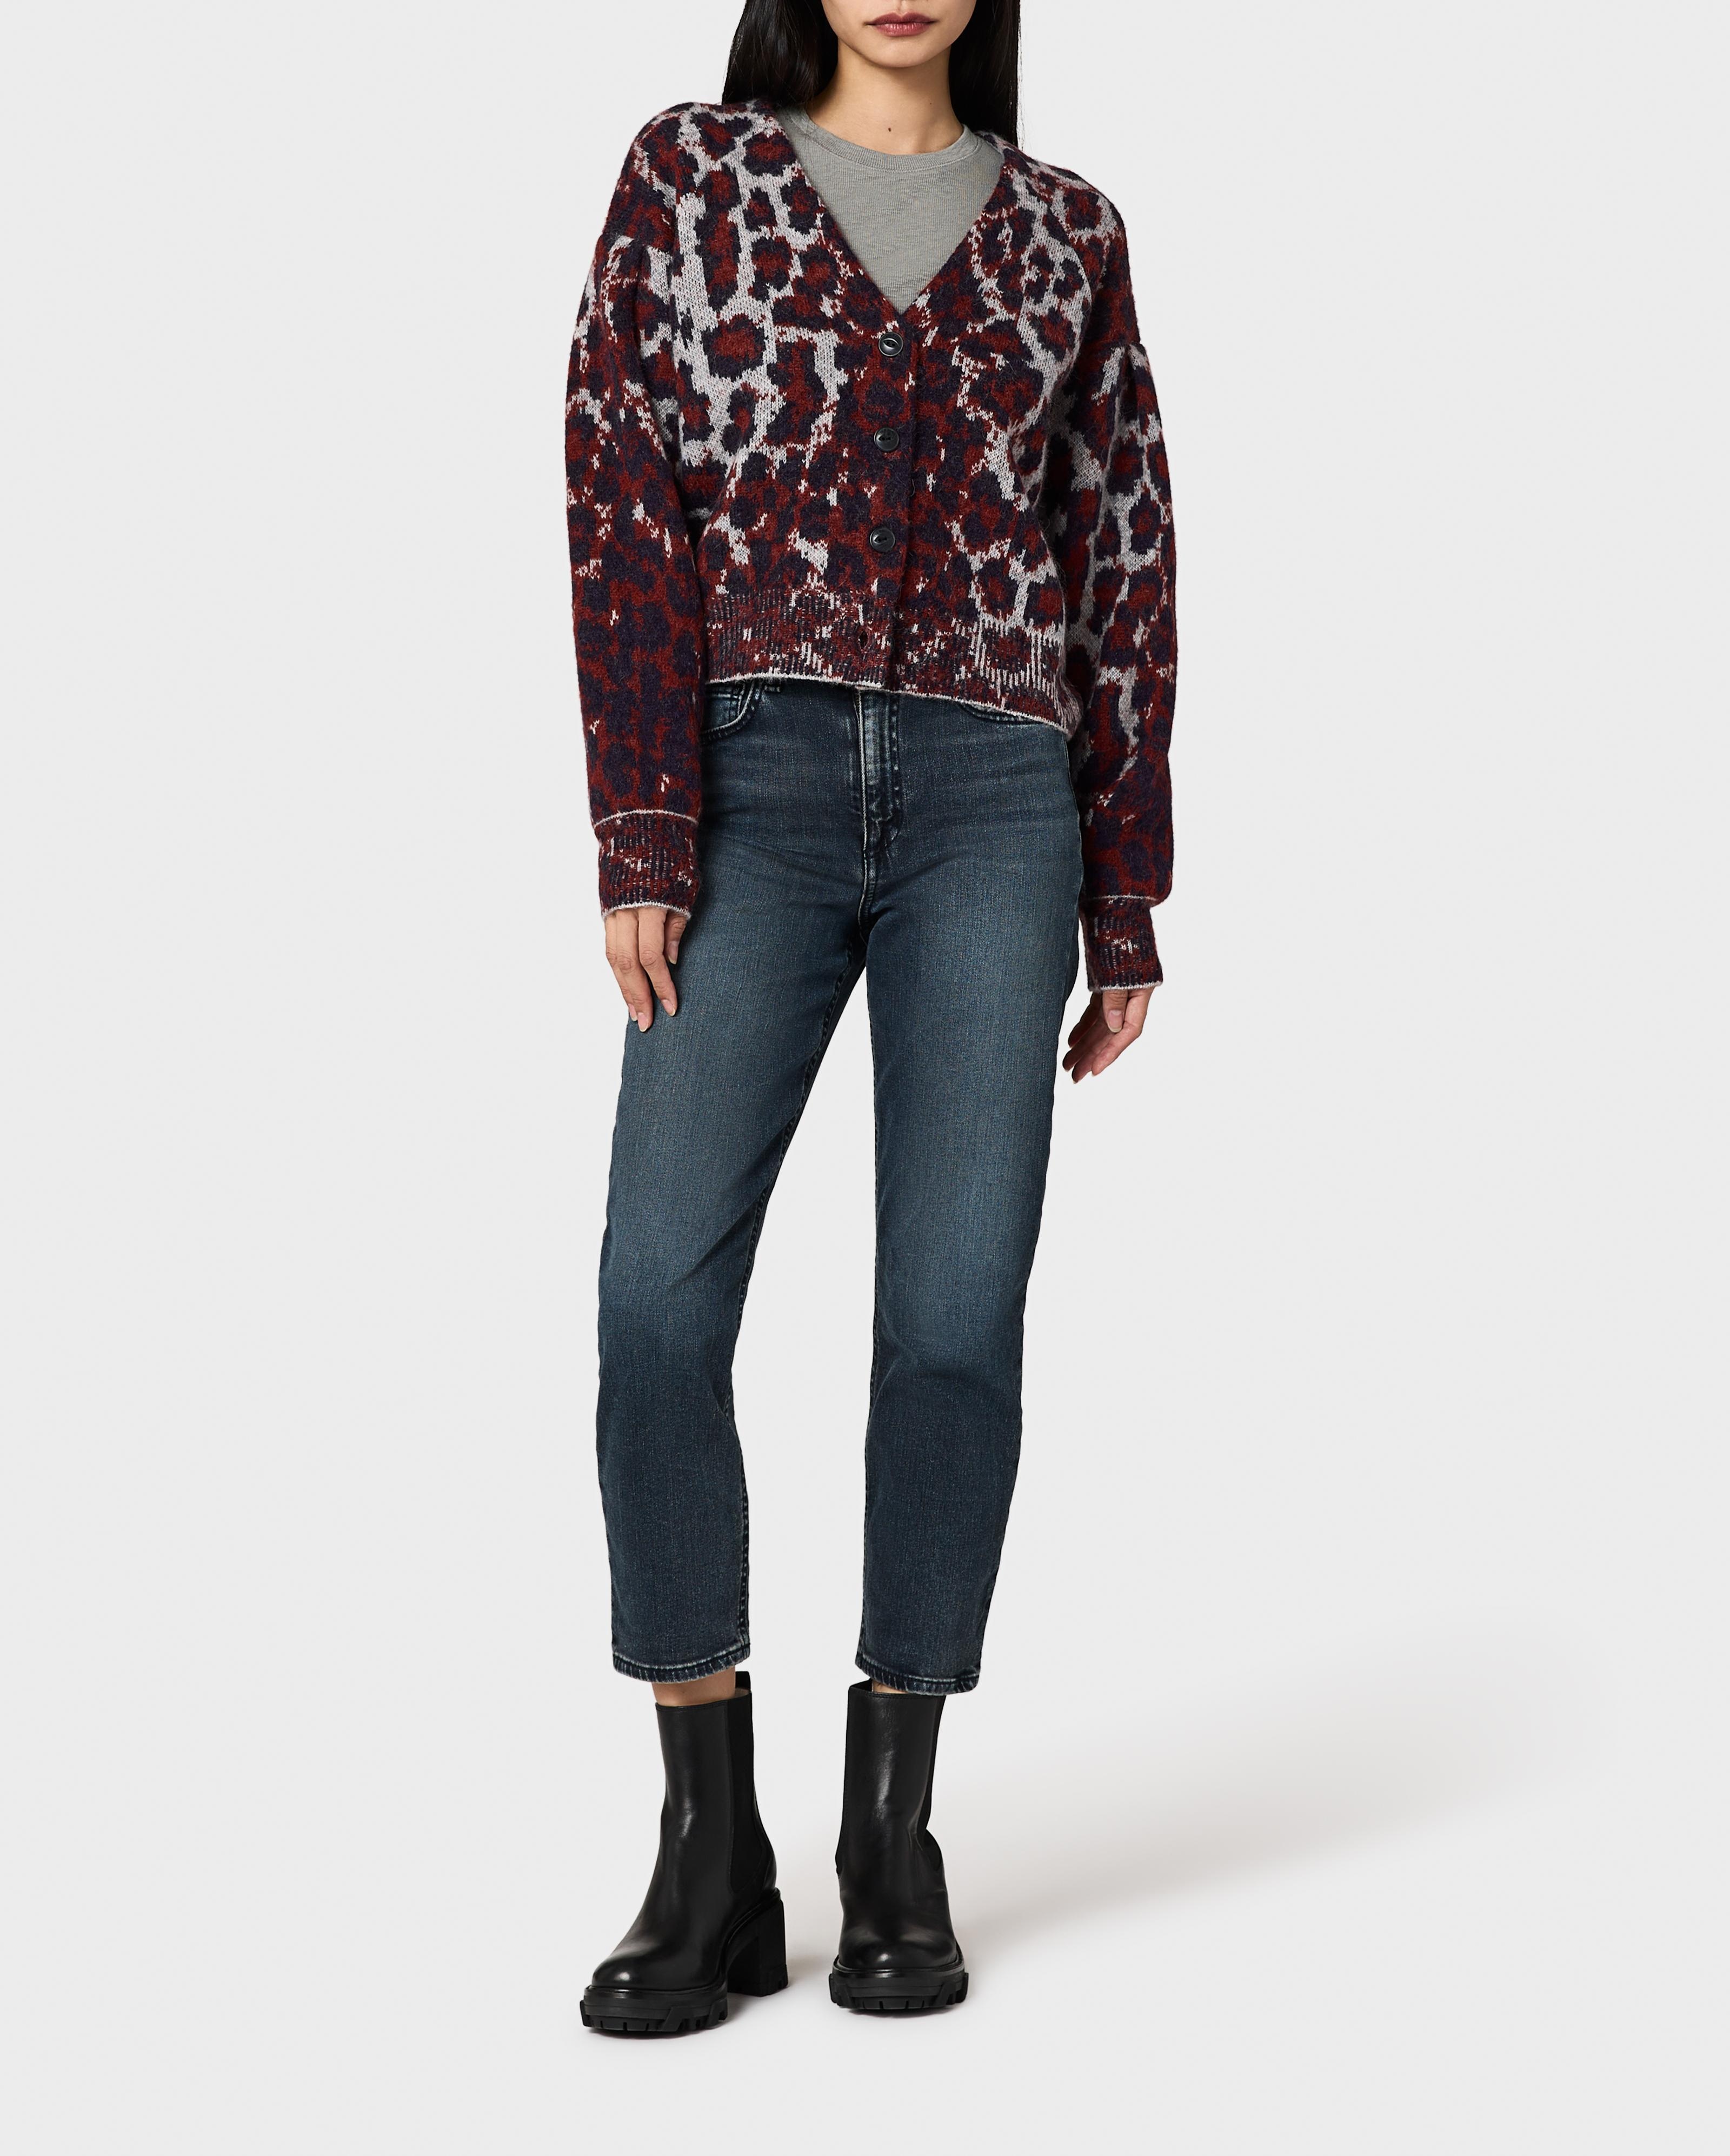 Sarah Wool Leopard Cardigan
Relaxed Fit - 1